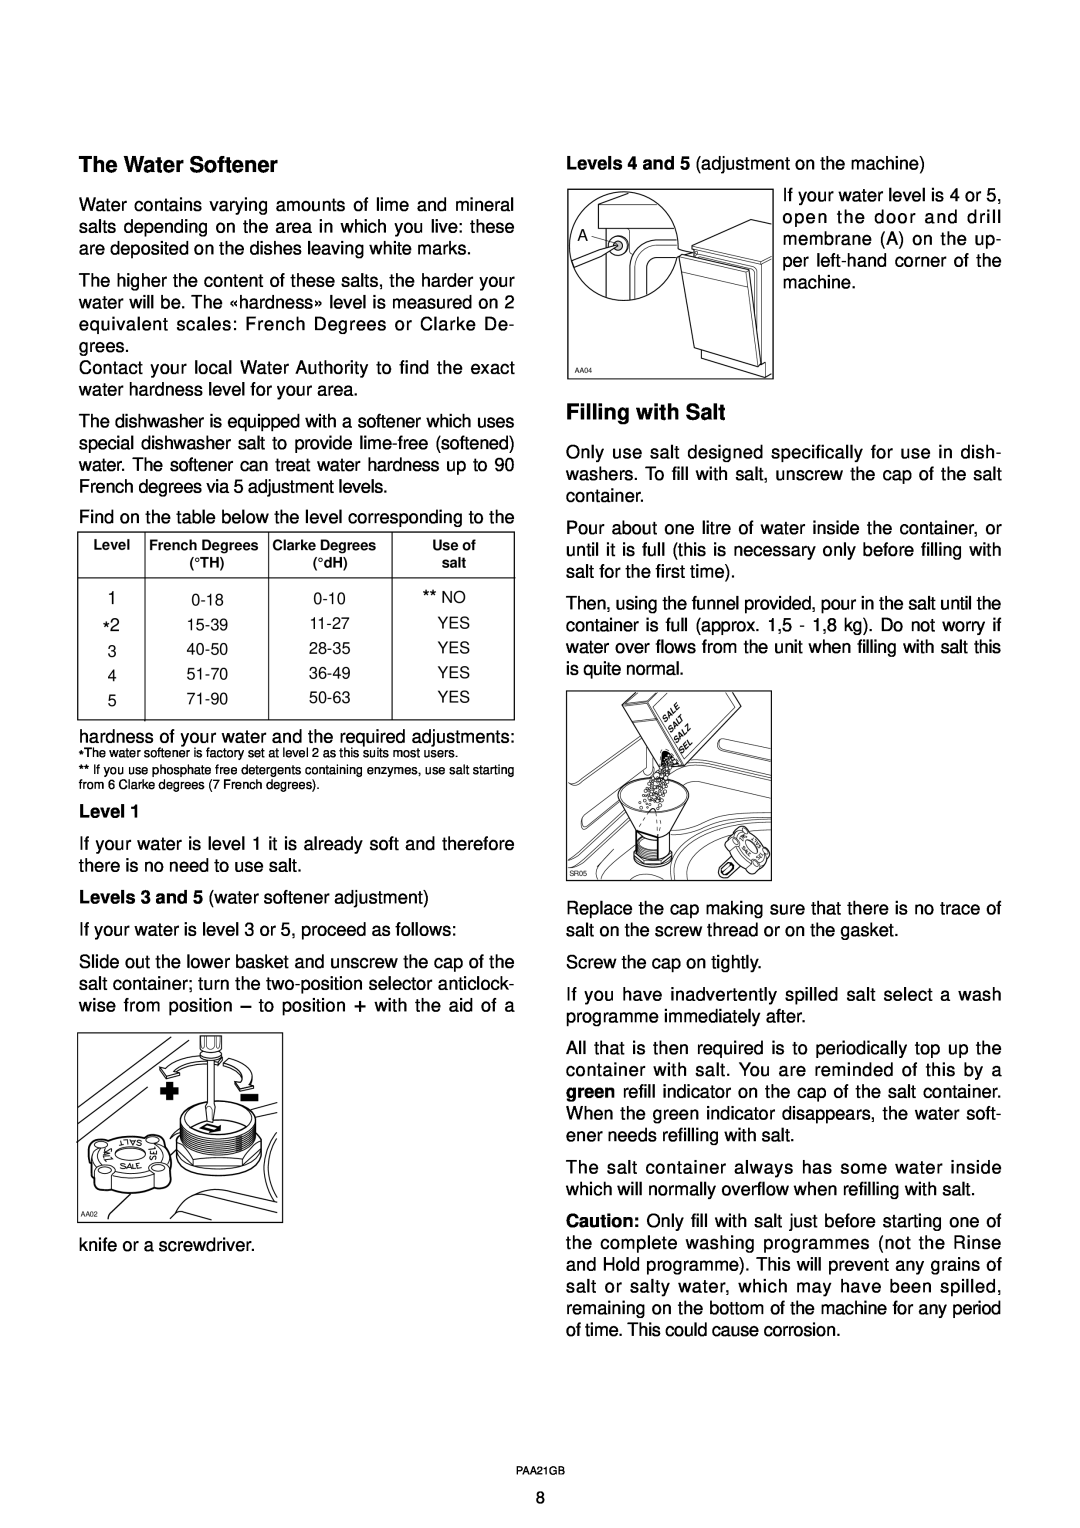 Zanussi DW 911 manual The Water Softener, Filling with Salt, Level 